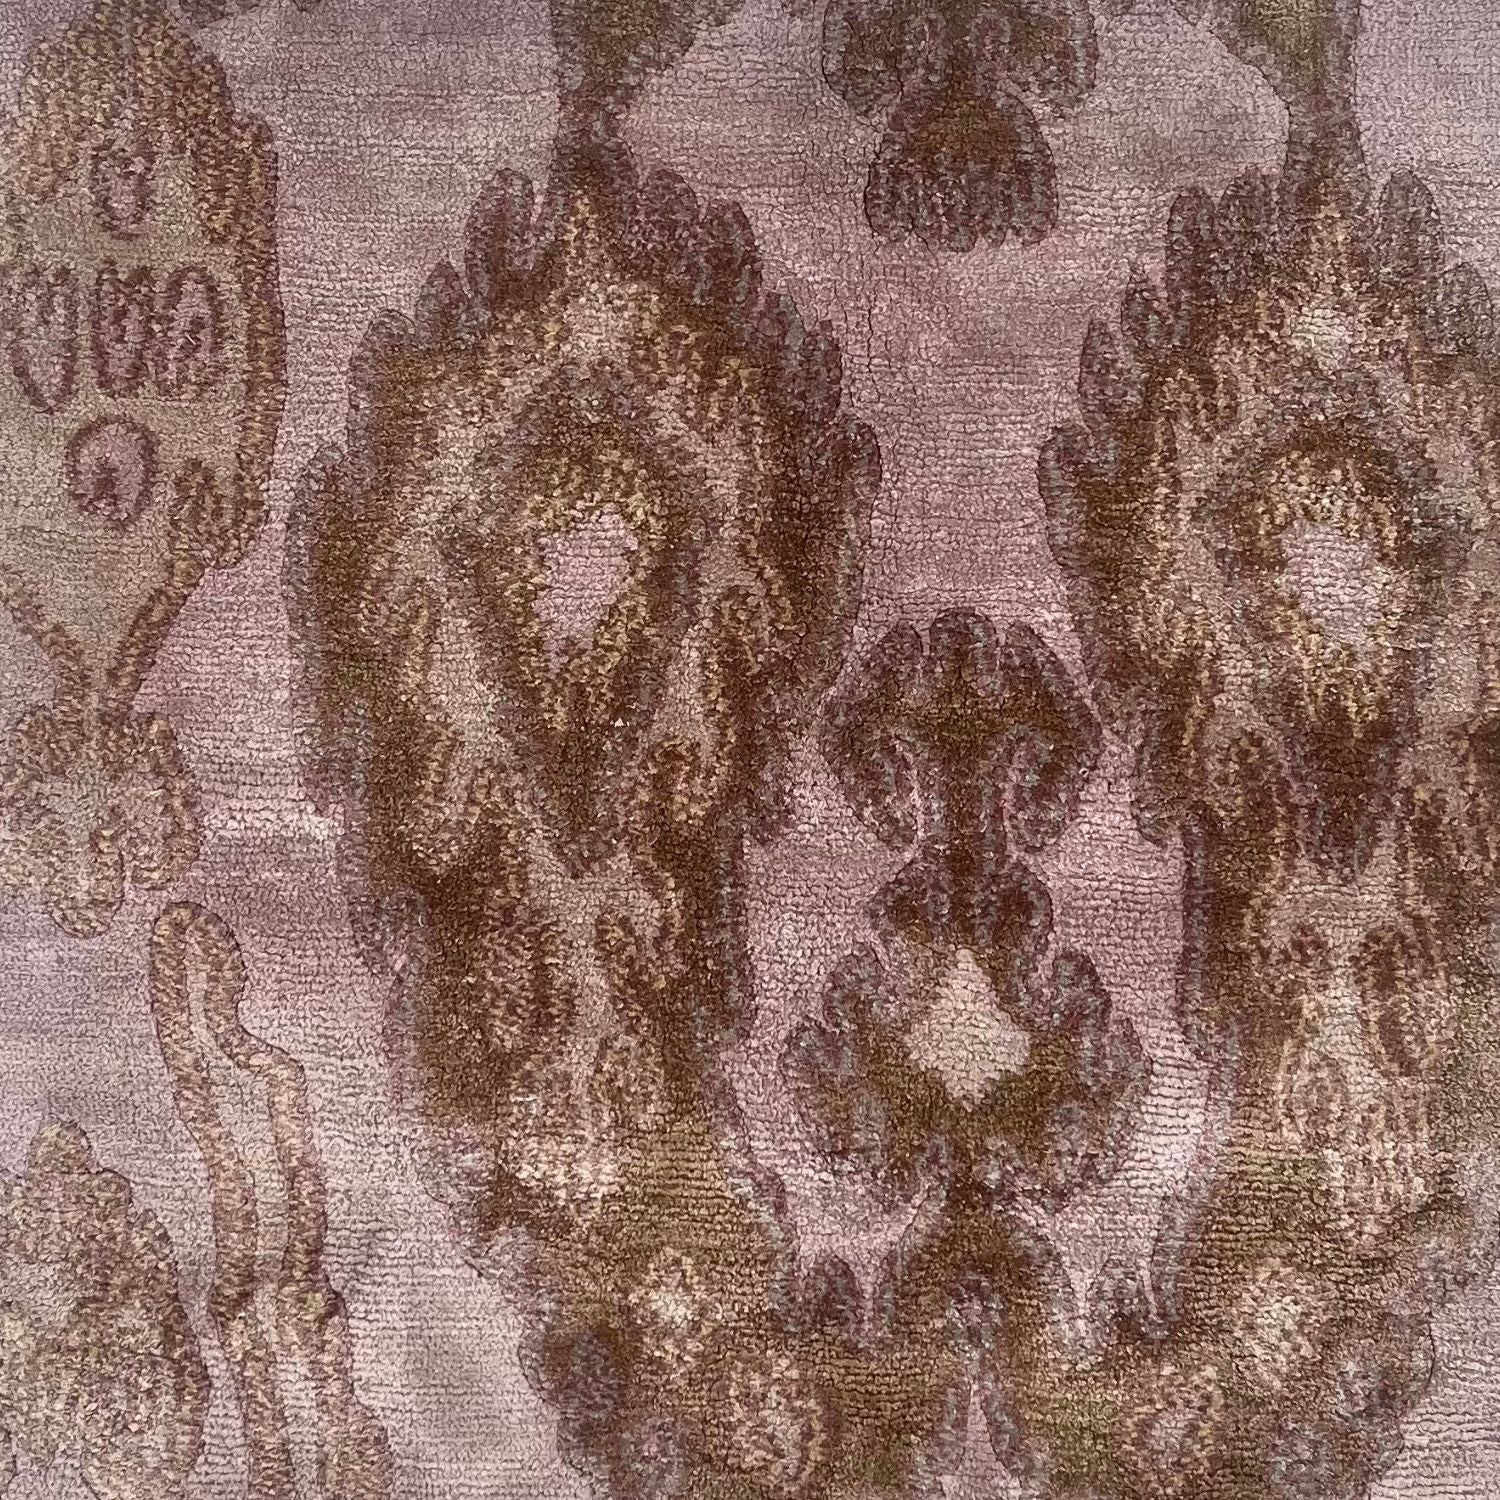 A handknotted rug with an ikat inspired motif in lavender and tan.